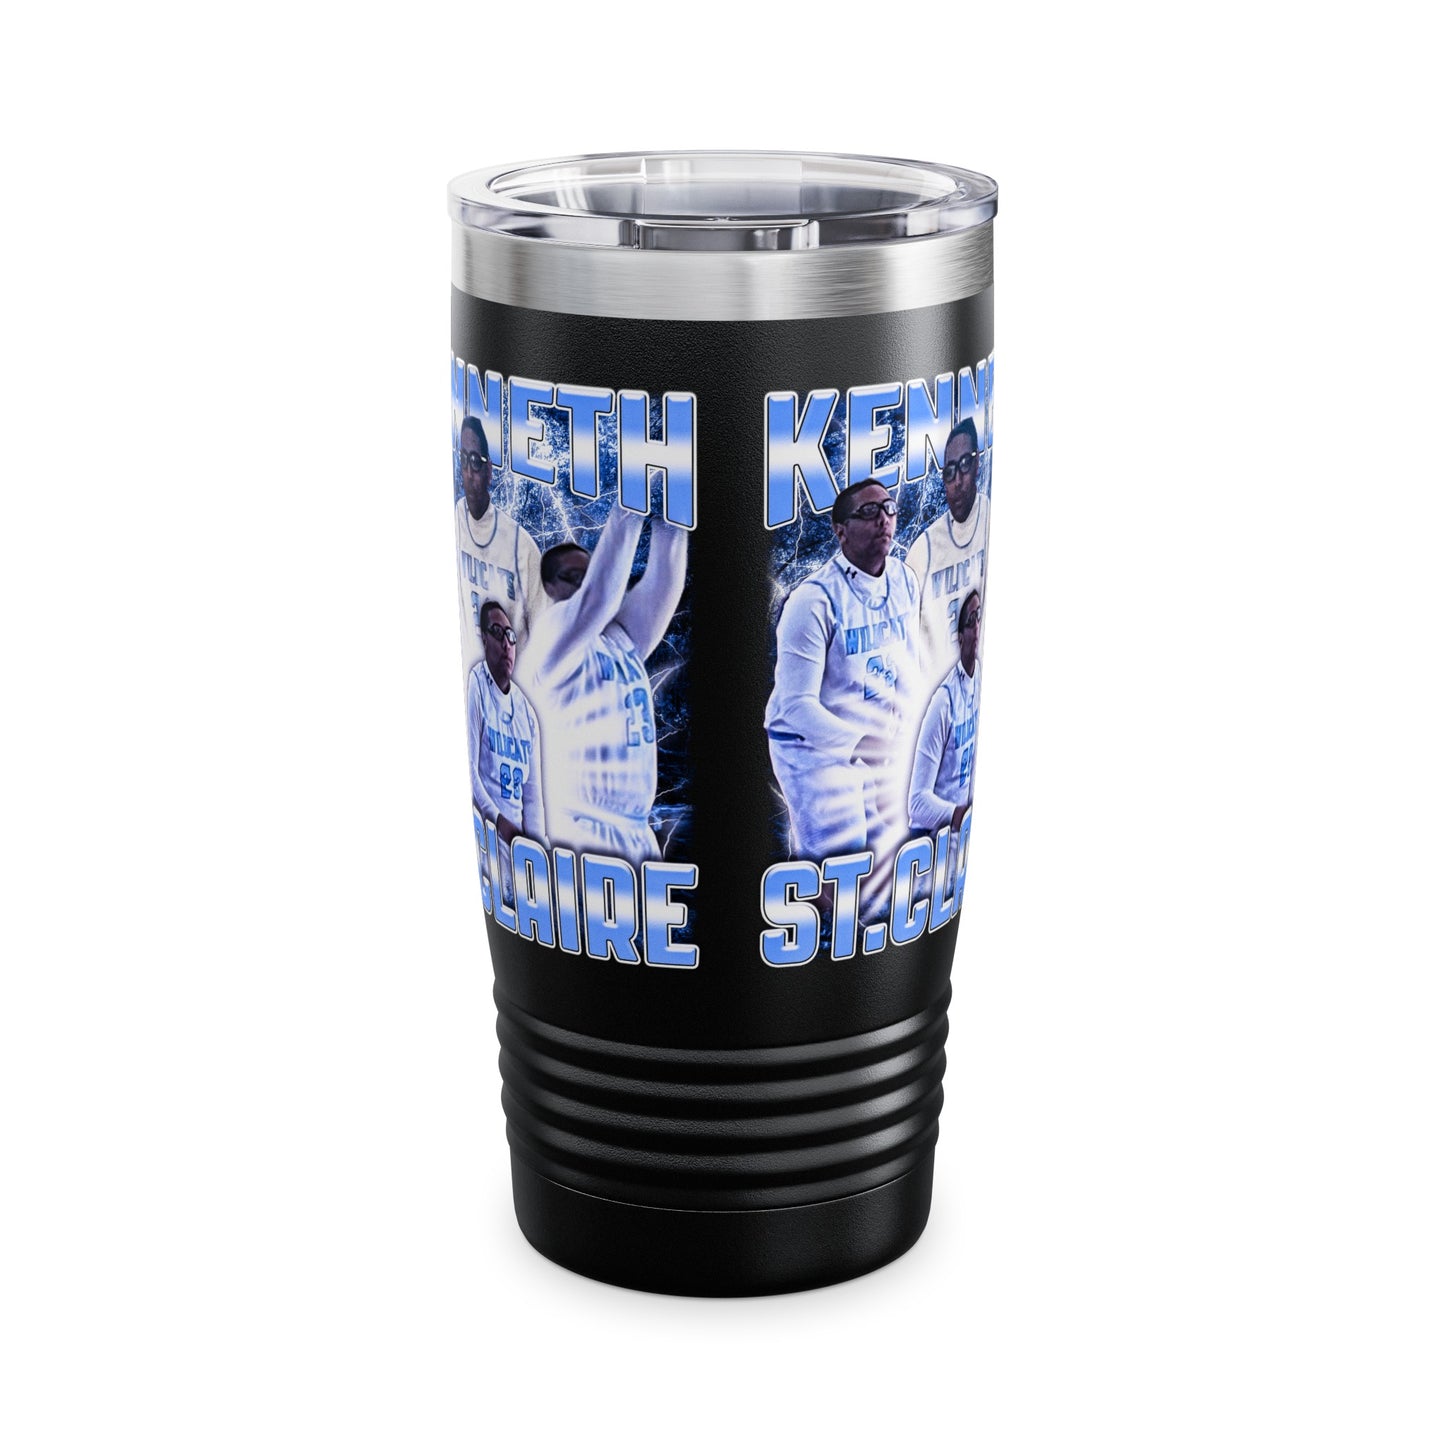 Kenneth St. Claire Stainless Steal Tumbler